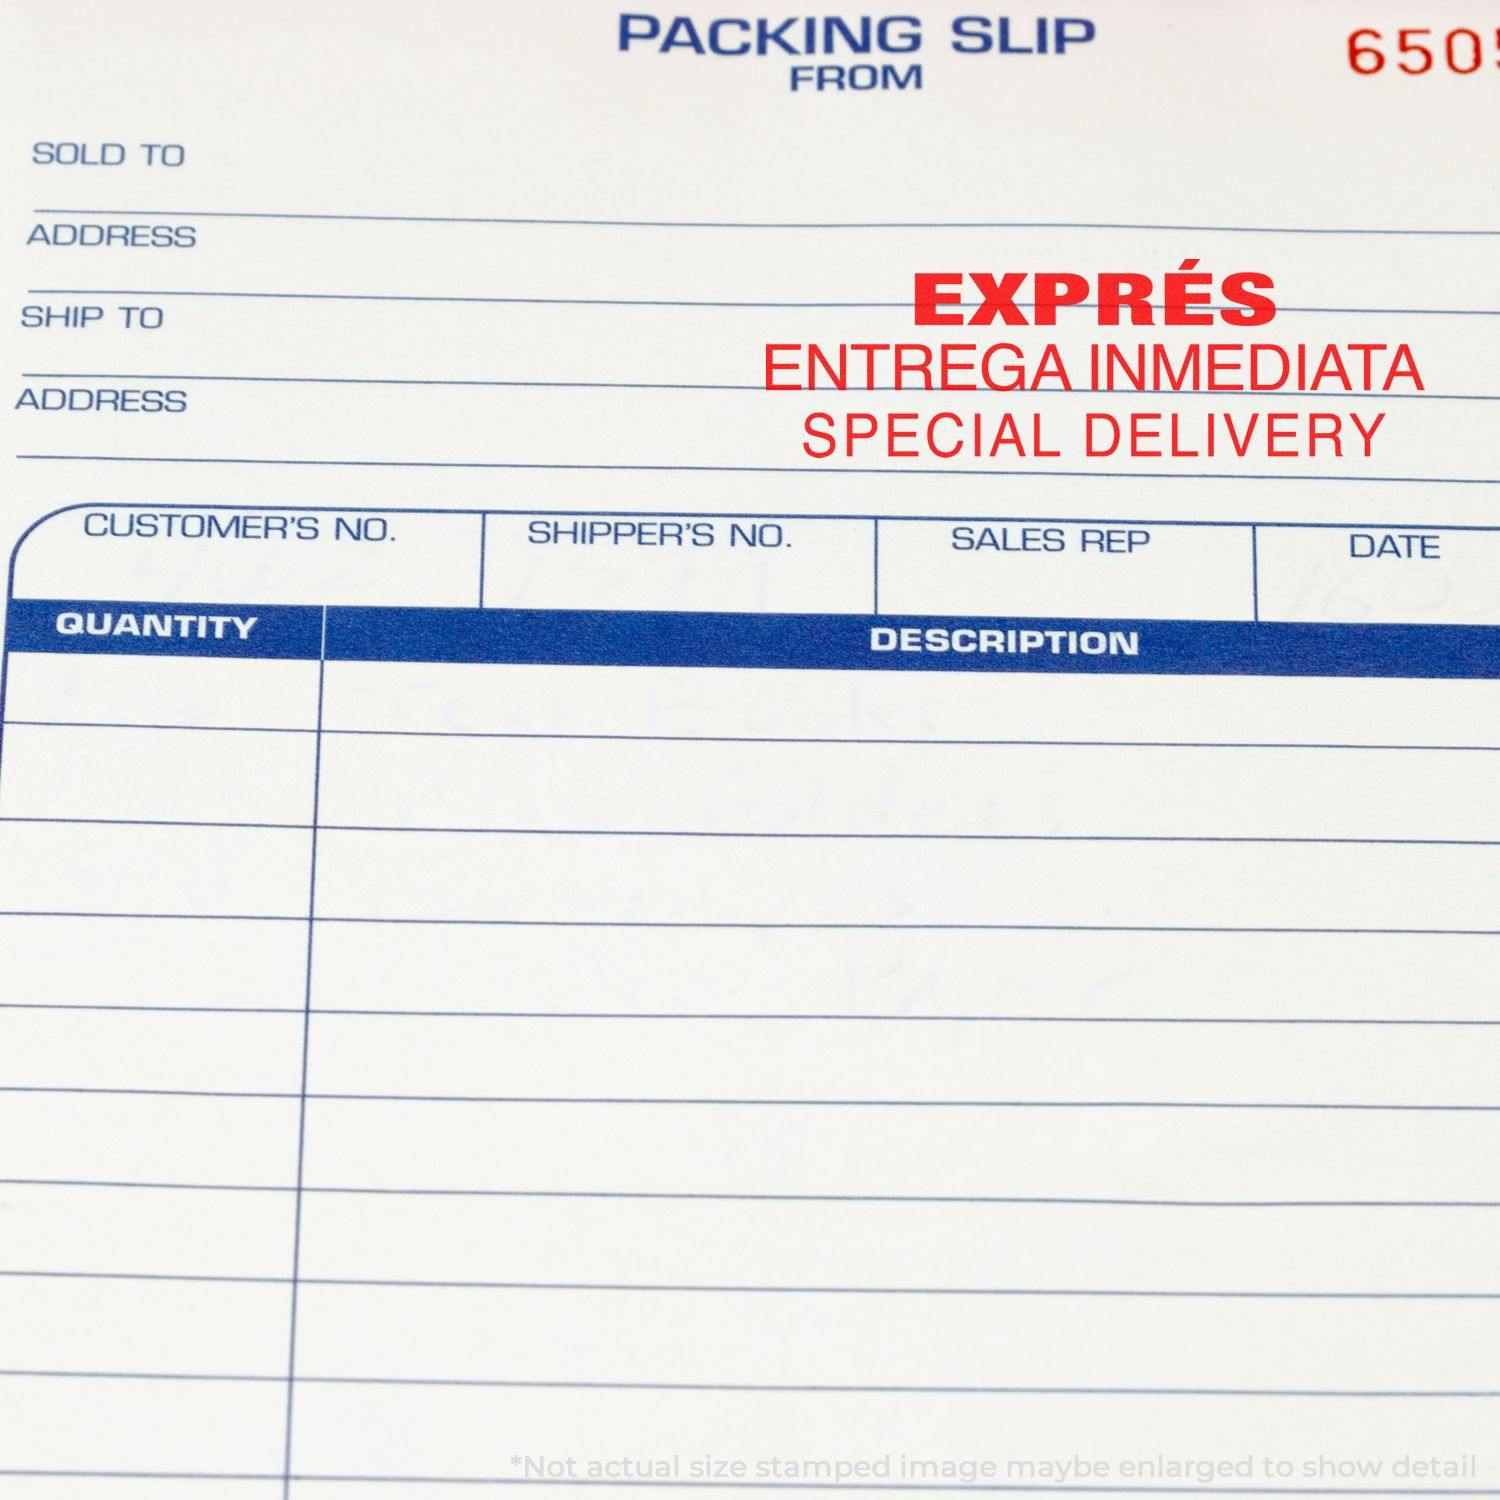 A stock office pre-inked stamp with a stamped image showing how the text "EXPRES ENTREGA INMEDIATA SPECIAL DELIVERY" is displayed after stamping.